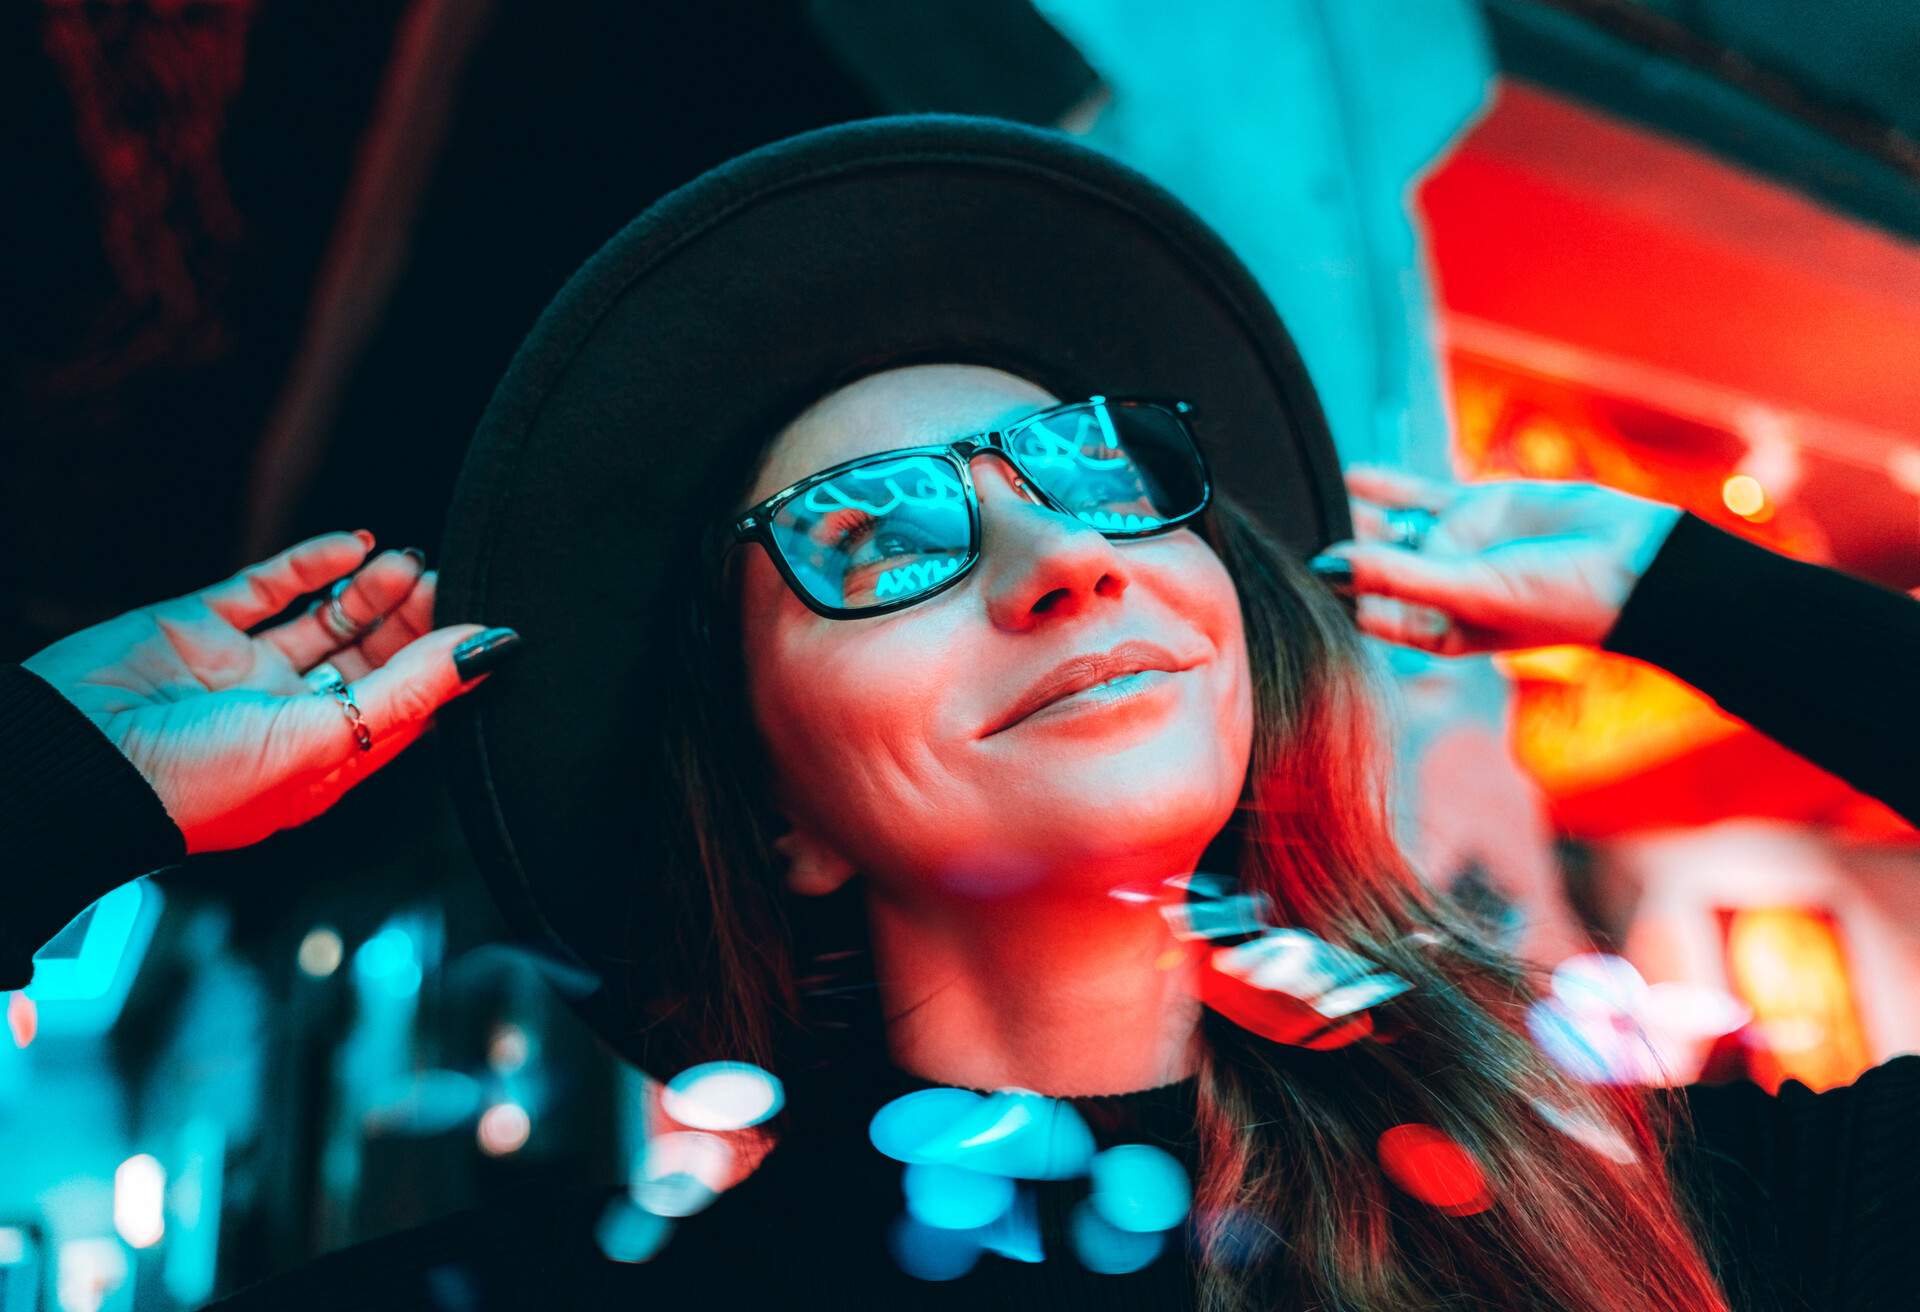 A woman wearing a black hat and glasses reflected the LED lights in front of her.